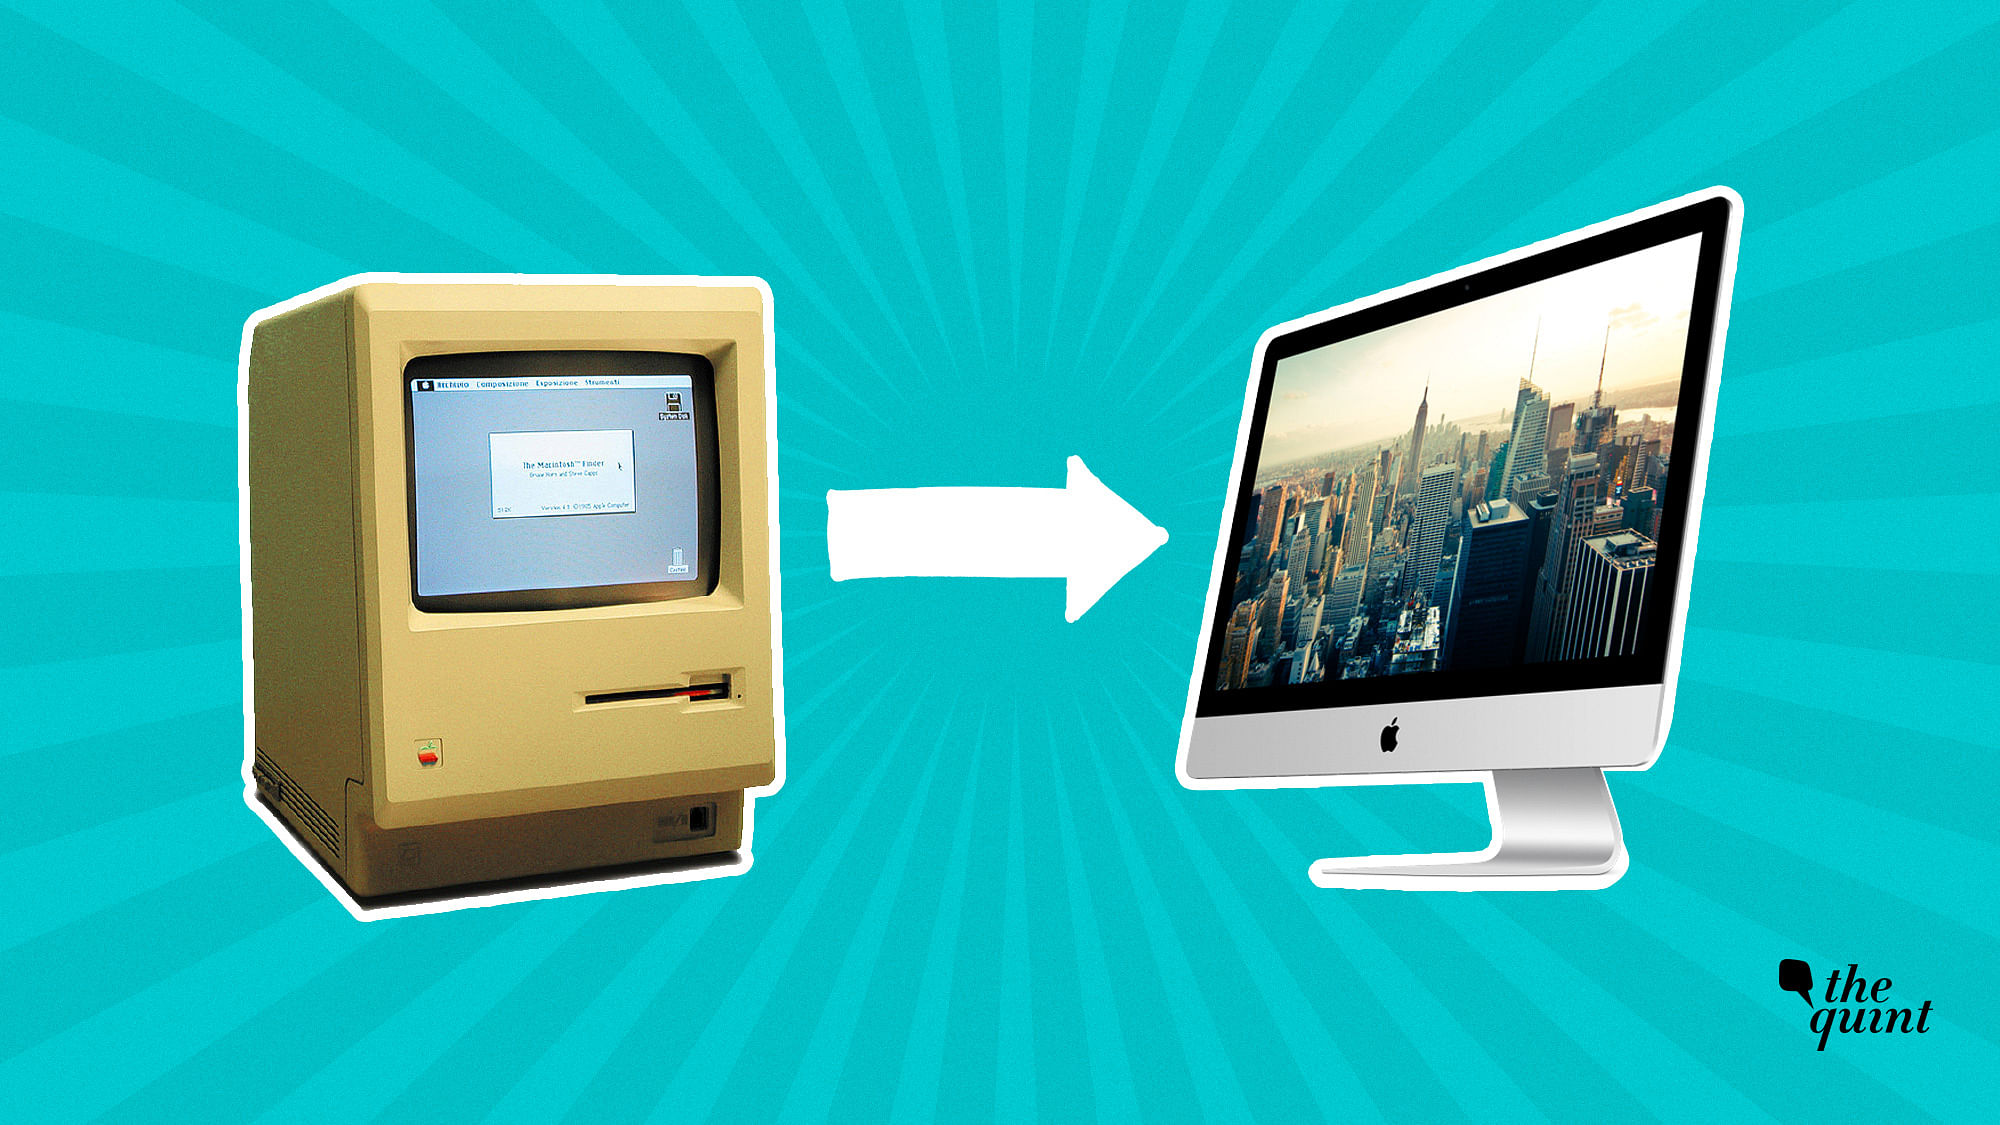 Macintosh then and now.